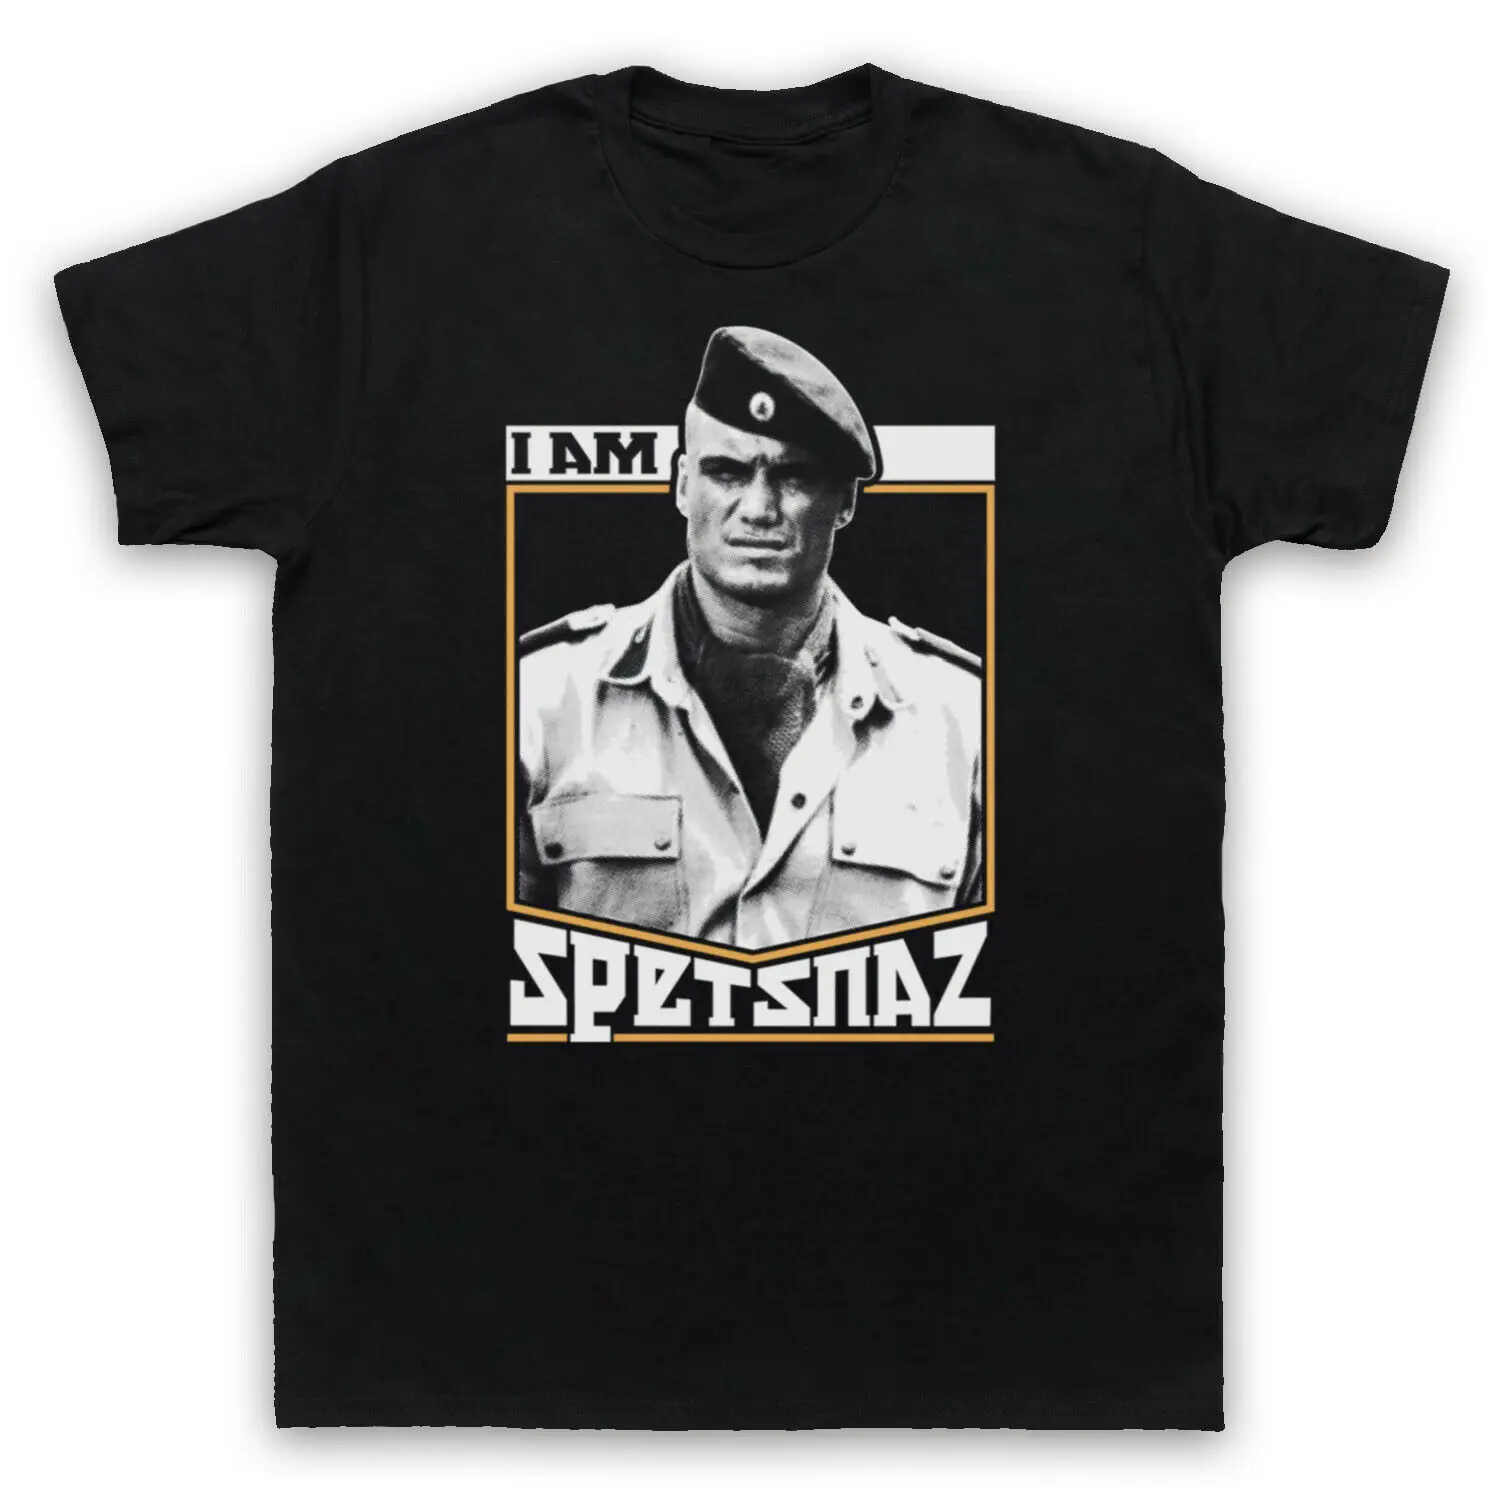 I AM SPETSNAZ COOL SOLDIER MENS T-SHIRT Premium Cotton Short Sleeve O-Neck Mens T Shirt  - buy with discount